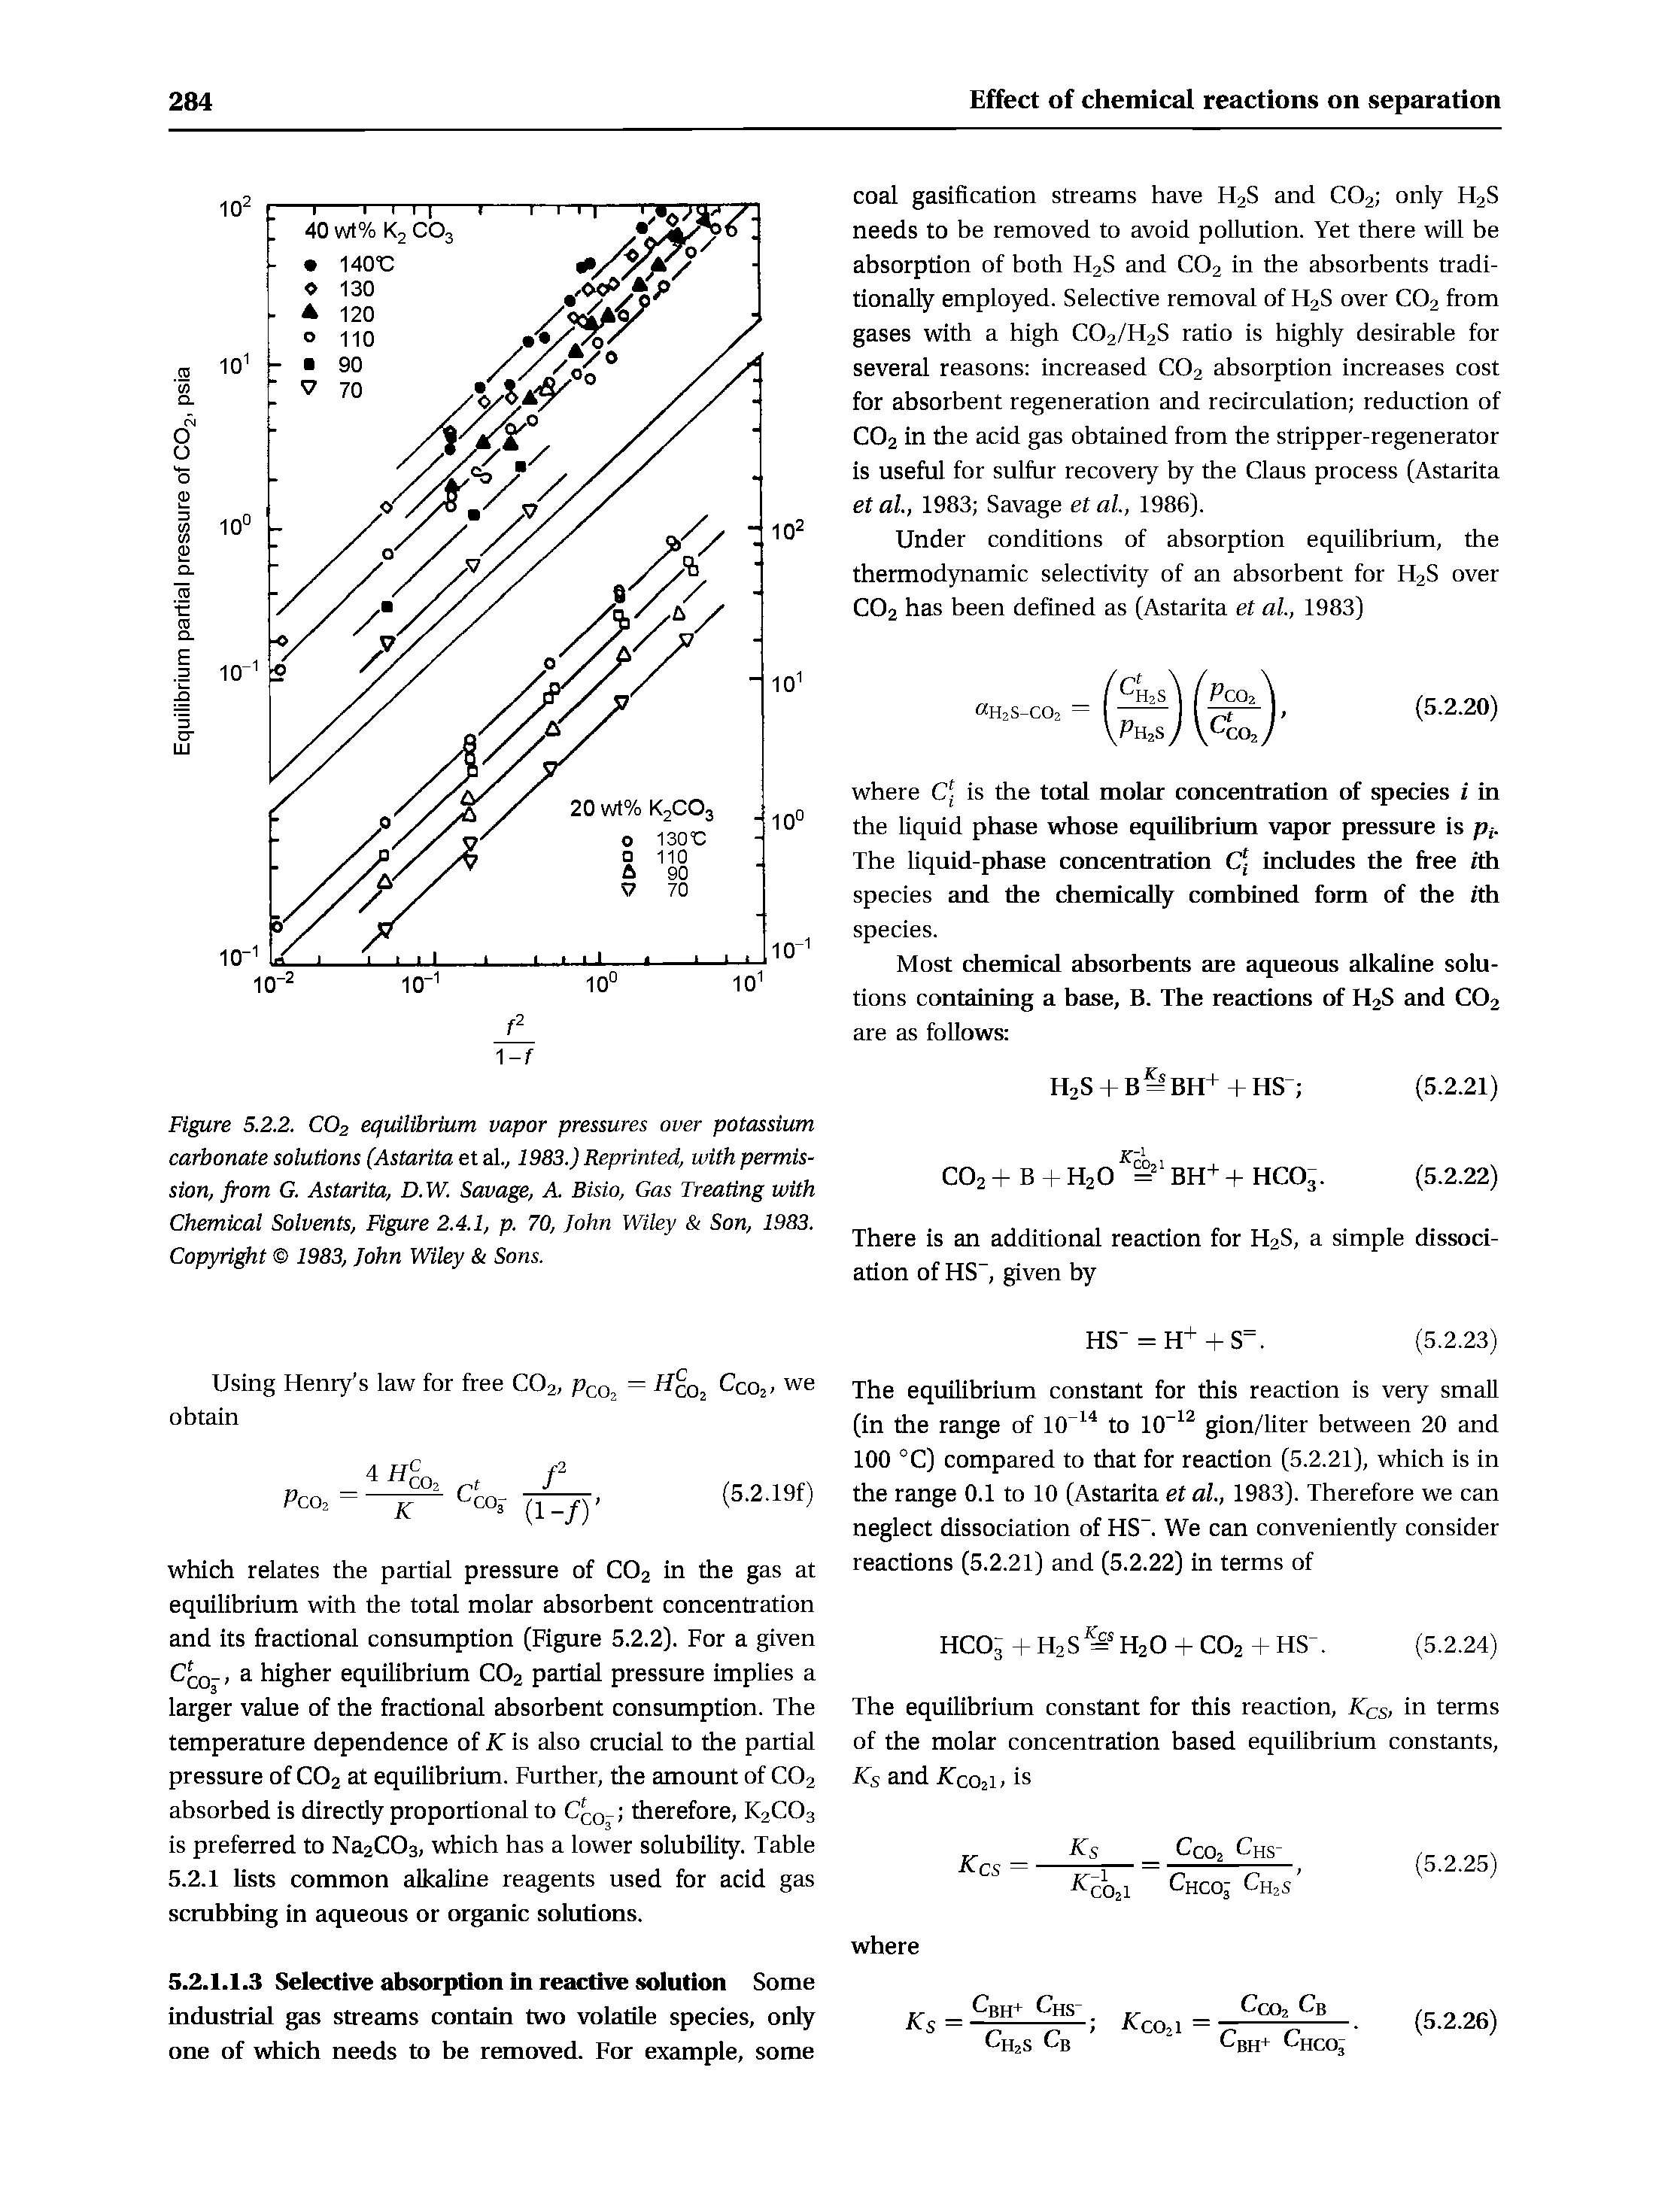 Figure 5.2.2. CO2 equilibrium vapor pressures over potassium carbonate solutions (Astarita et al., 1983.) Reprinted, with permission, from G. Astarita, D. W. Savage, A. Bisio, Gas Treating with Chemical Solvents, Figure 2.4.1, p. 70, John Wiley Son, 1983. Copyright 1983, John Wiley Sons.